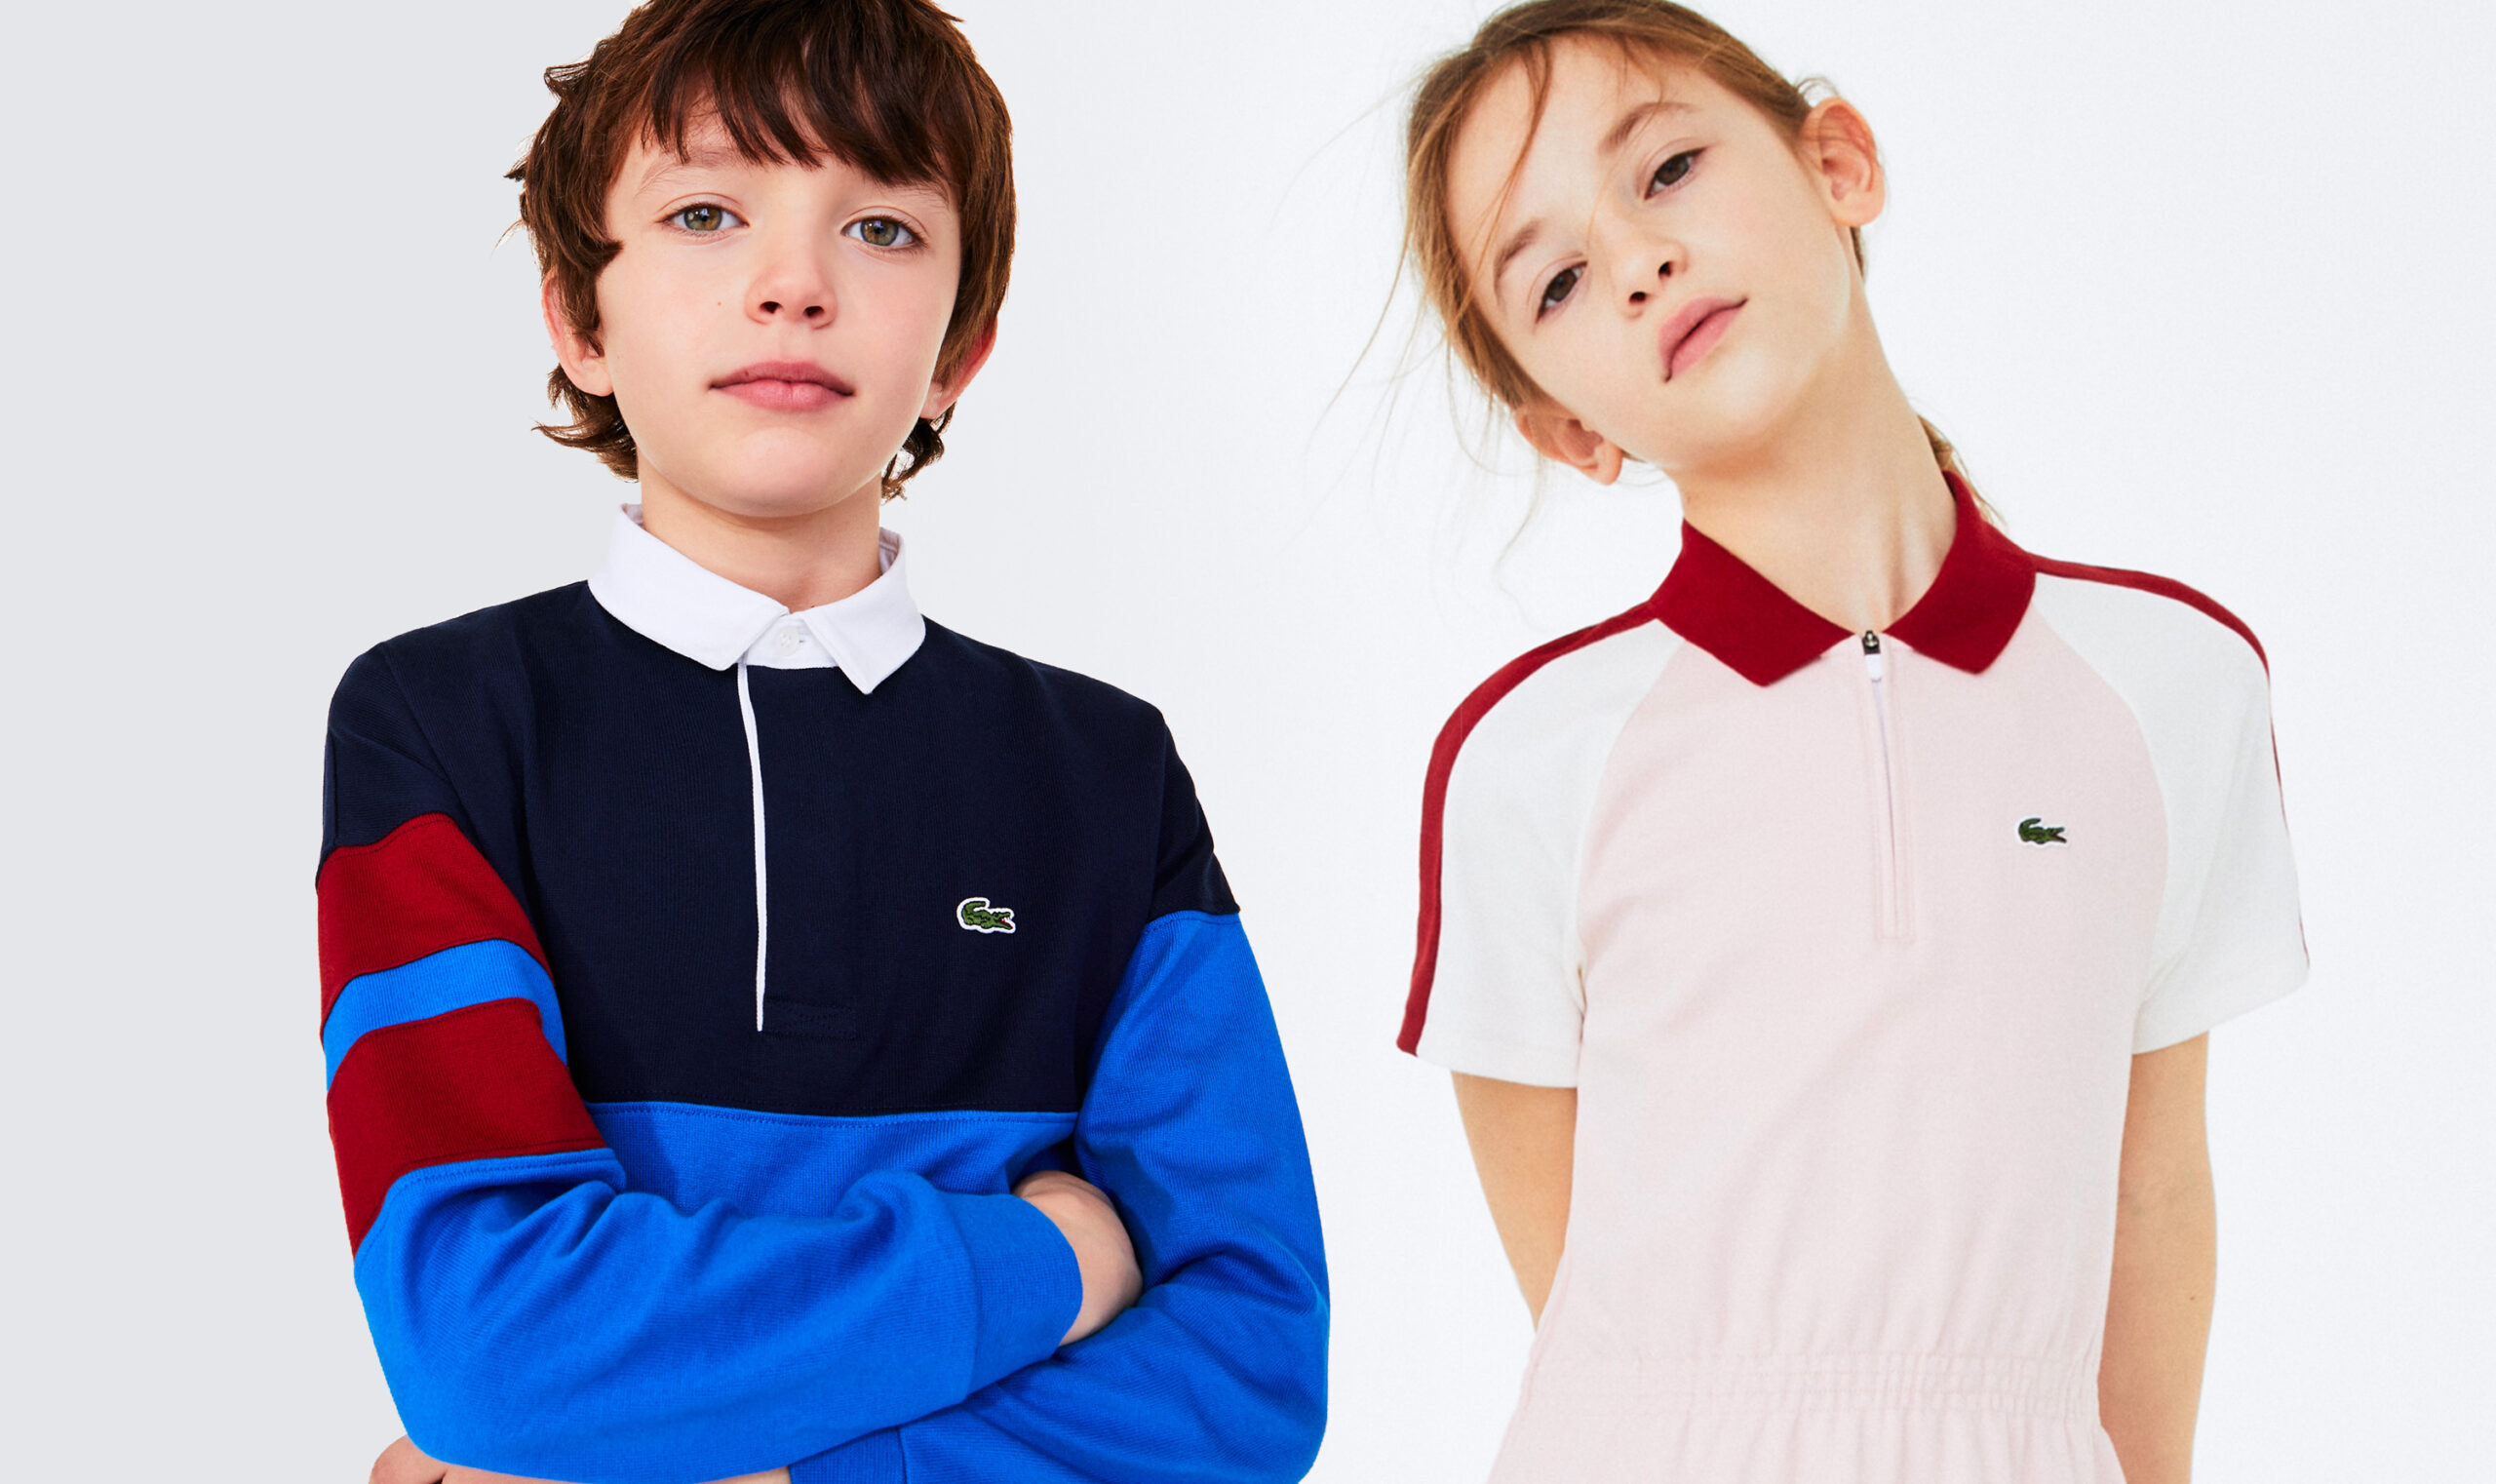 rygte Oh Leonardoda Lacoste launches e-commerce flagship in Kuwait, Qatar, and Egypt